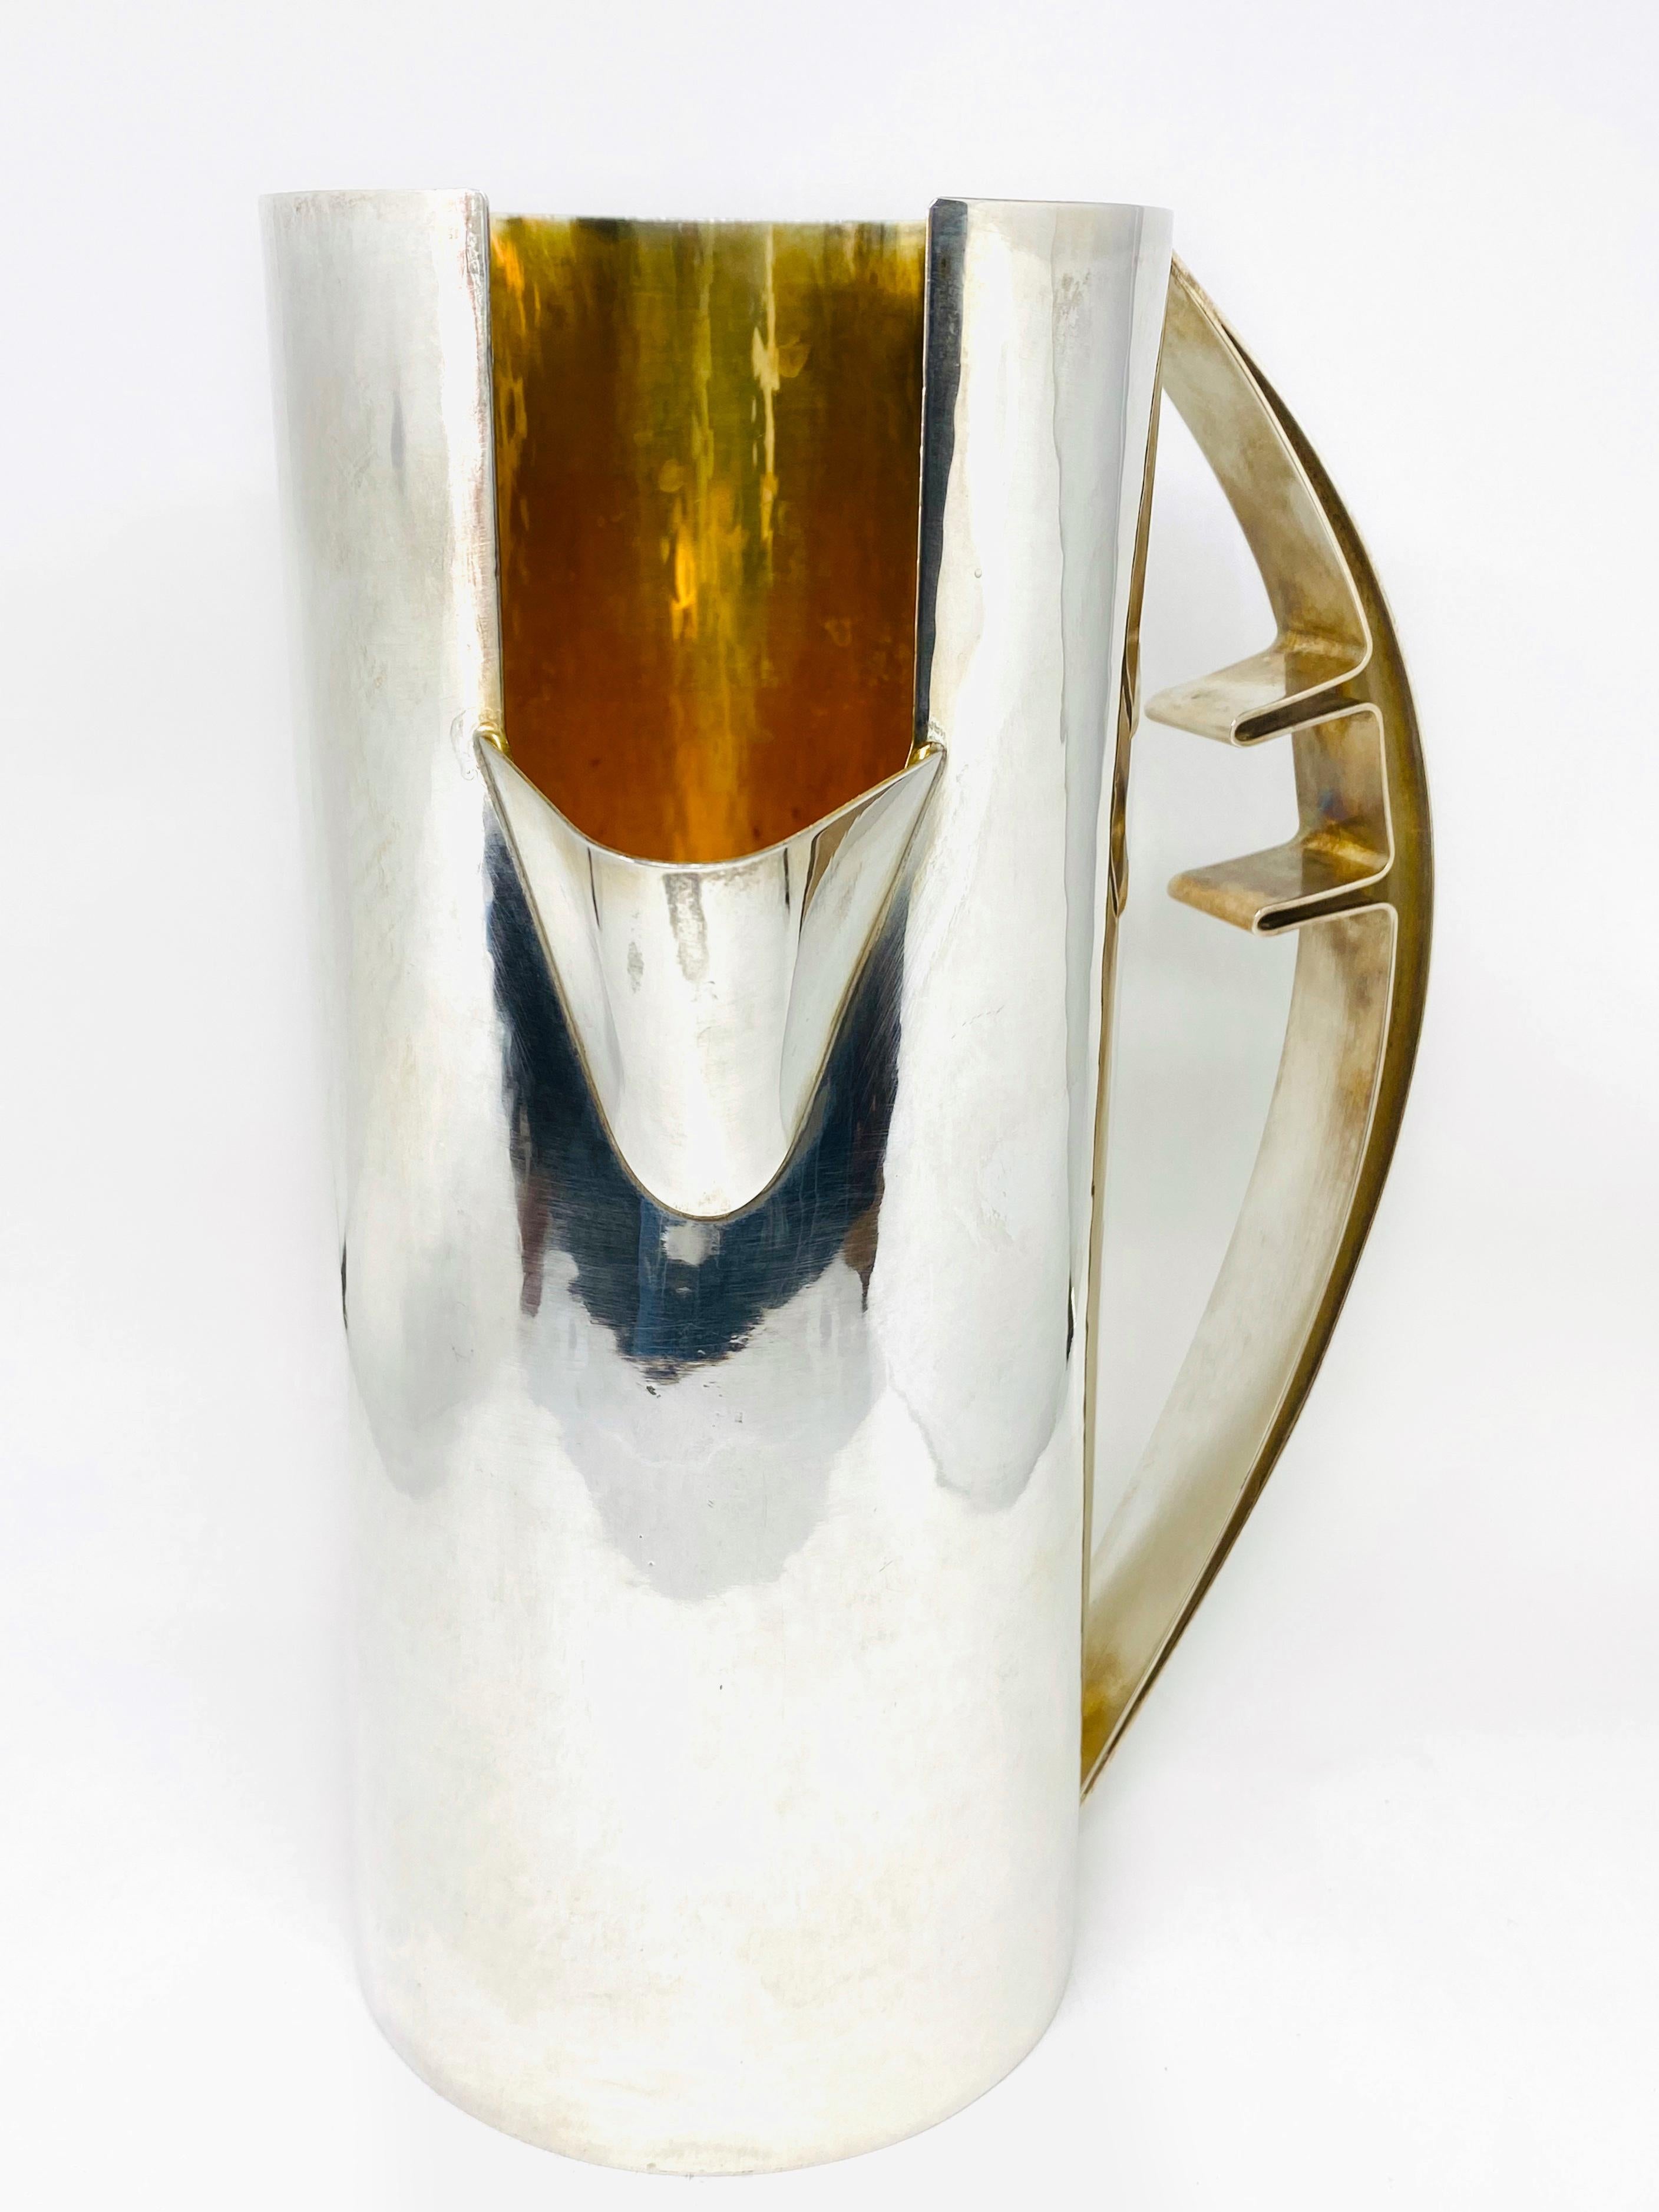 Cleto Munari Silver and Gold Plated Water Pitcher by Carlo Scarpa 

Product details:
Circa 1960's
800 Sterling silver with hammered gold plated overlay interior
Features a large curved handle and a deep set spout for easy pouring
Designed by Carlo